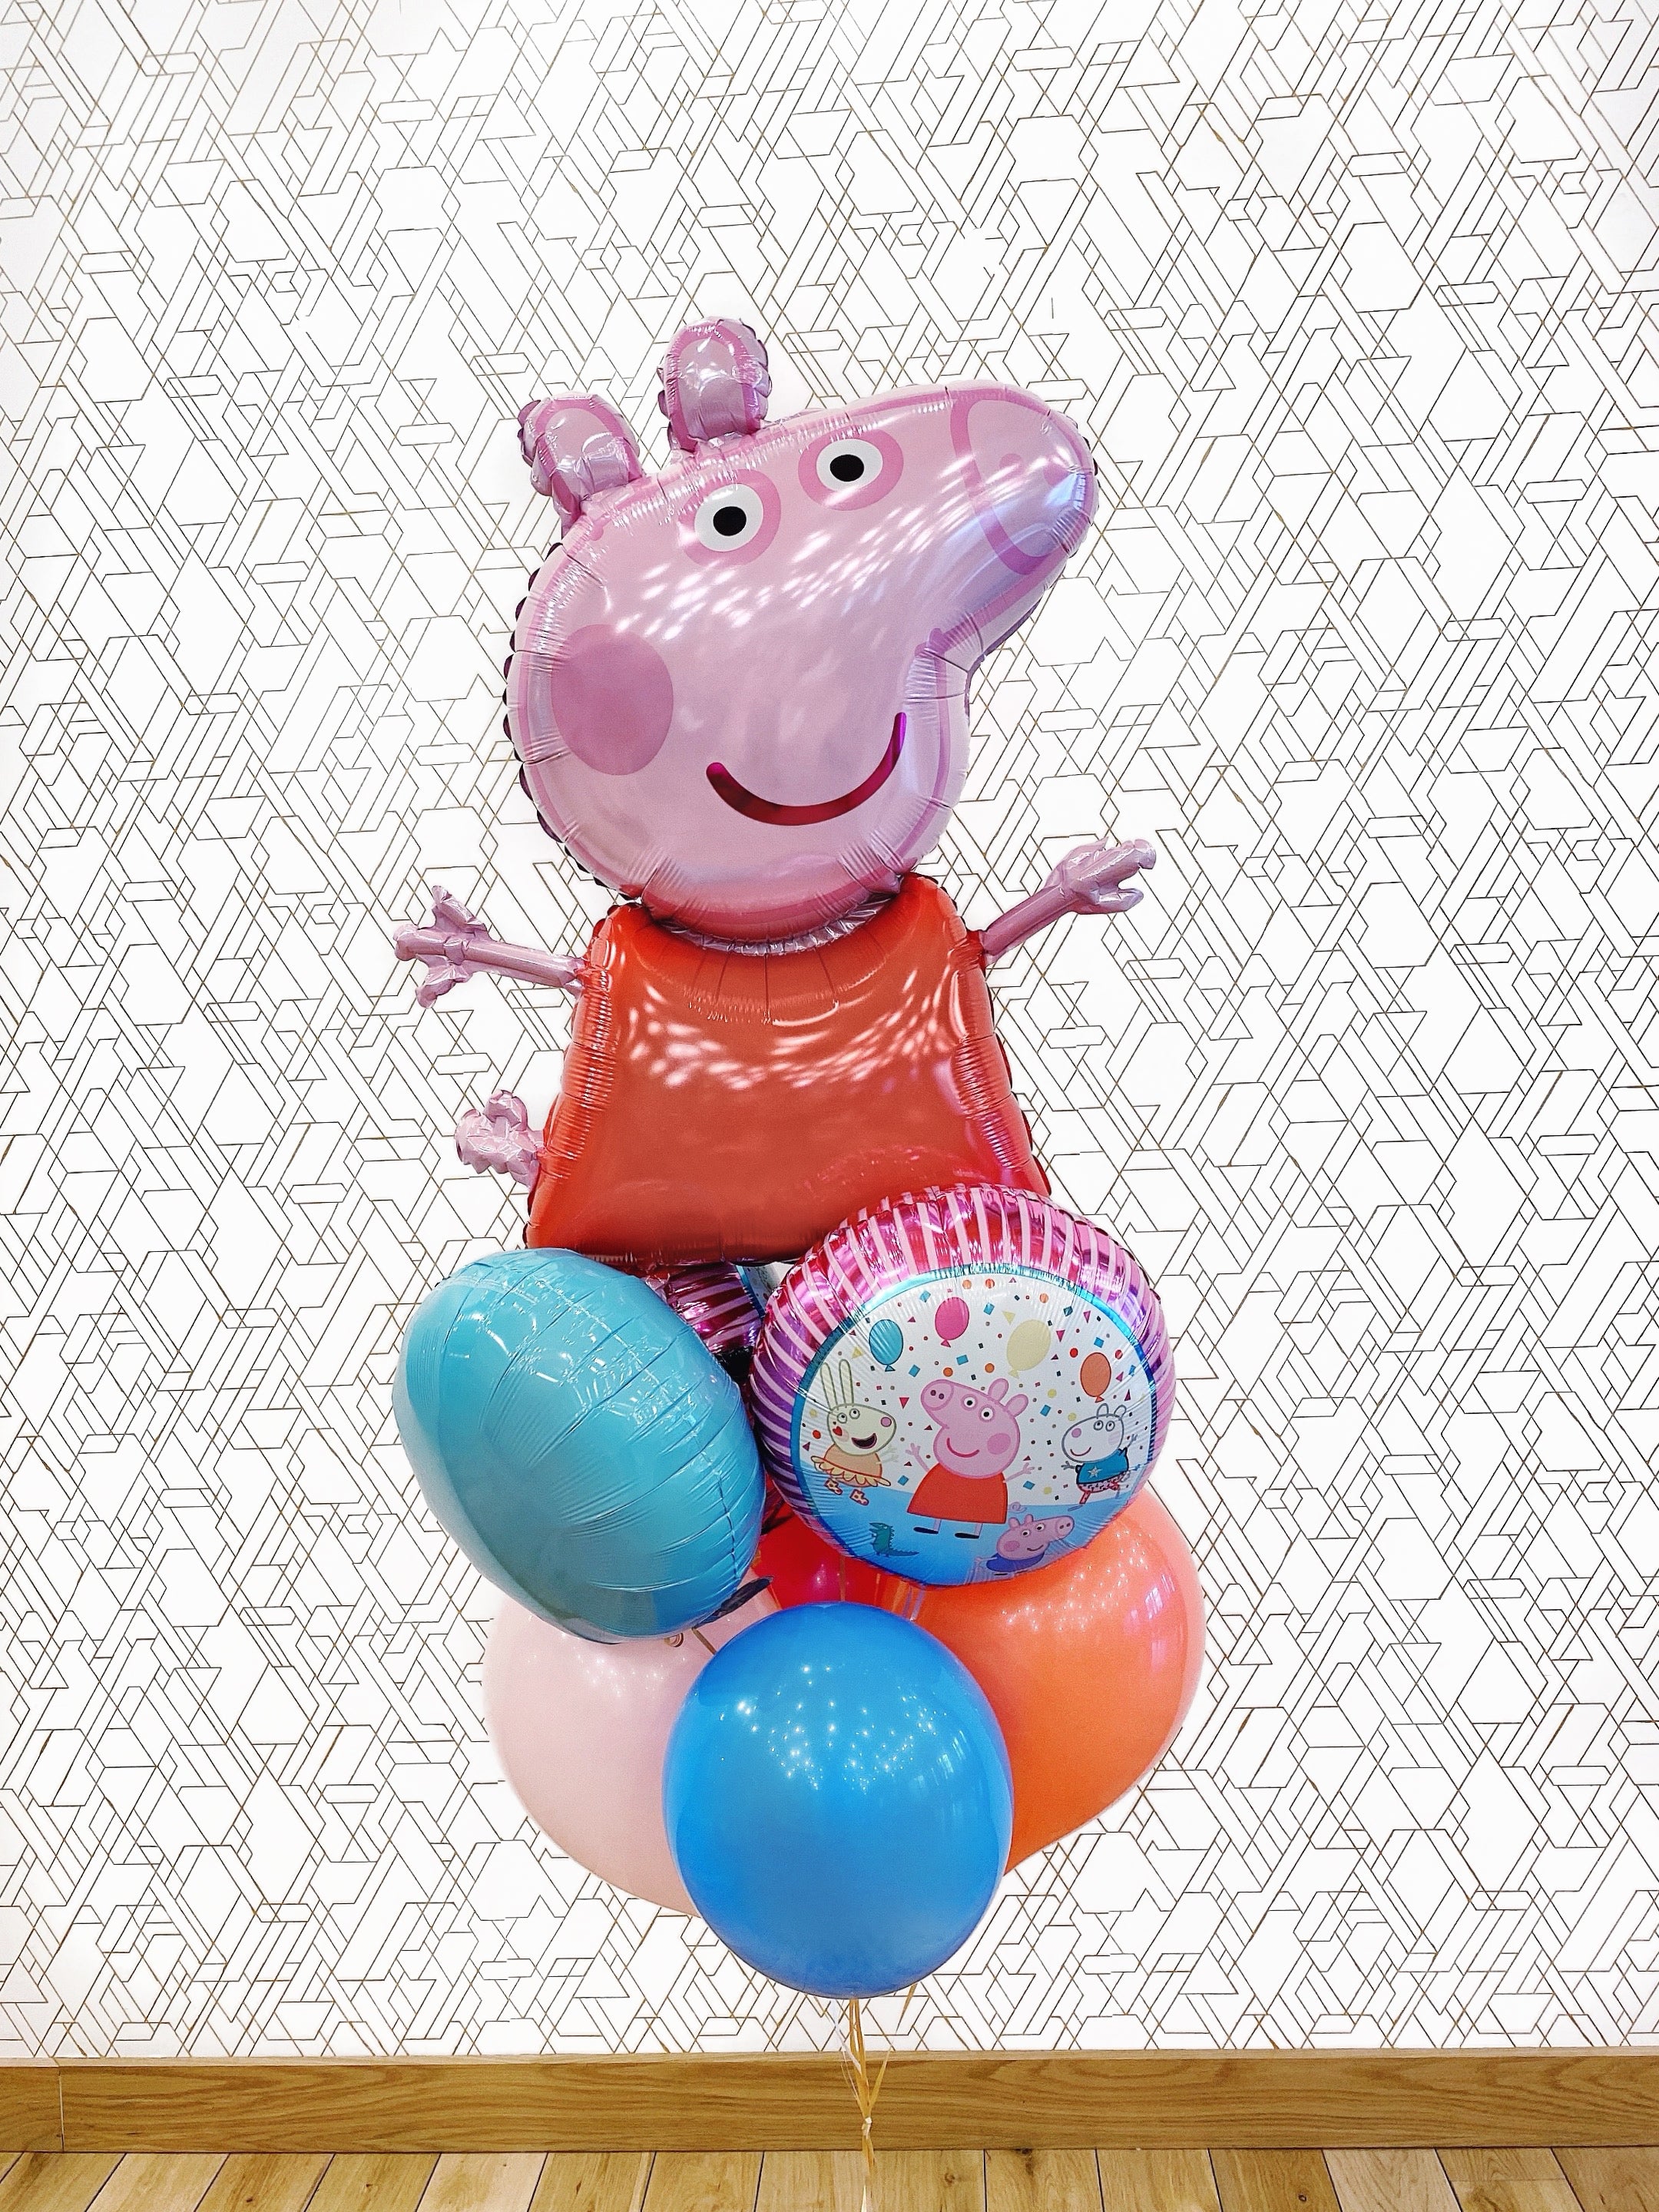 Peppa the Pig Balloons (Extra Deluxe Bouquet) Kids Birthday Balloons